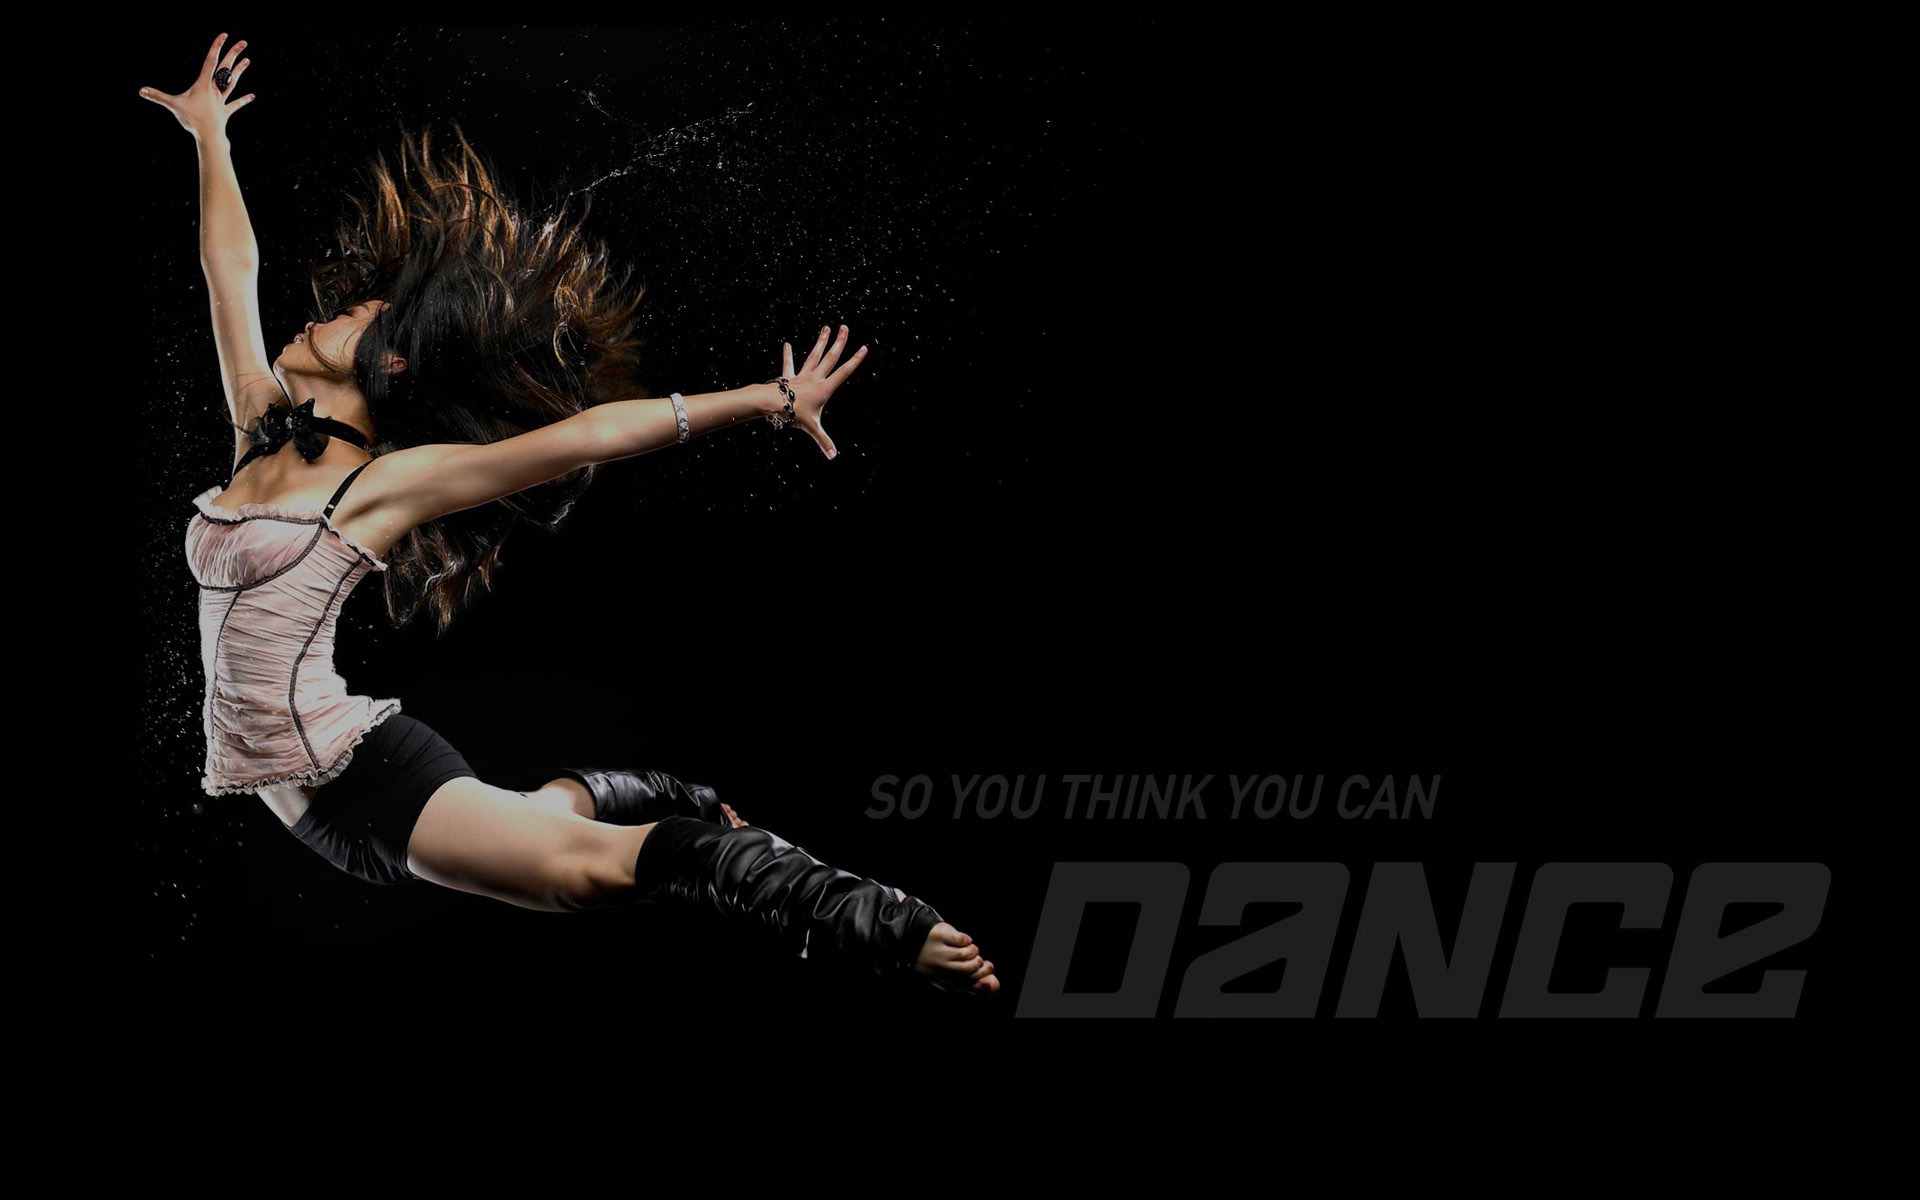 So You Think You Can Dance wallpaper (1) #1 - 1920x1200